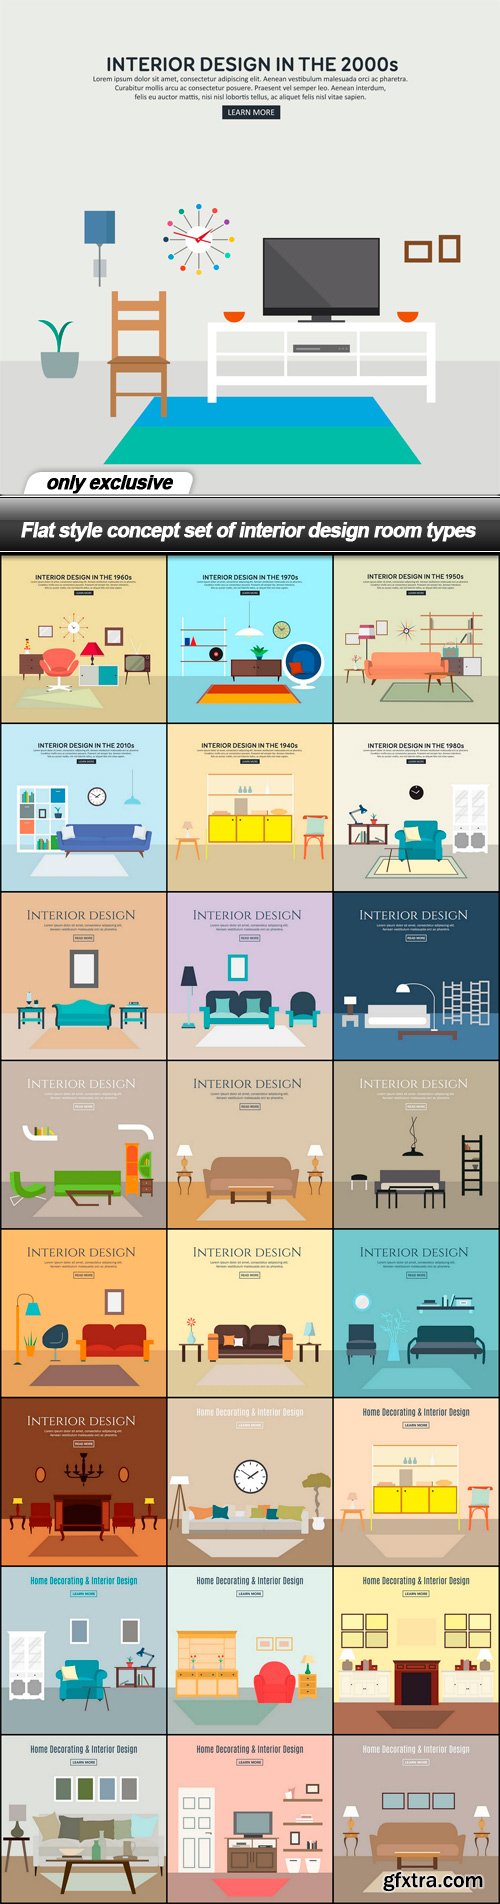 Flat style concept set of interior design room types - 25 EPS